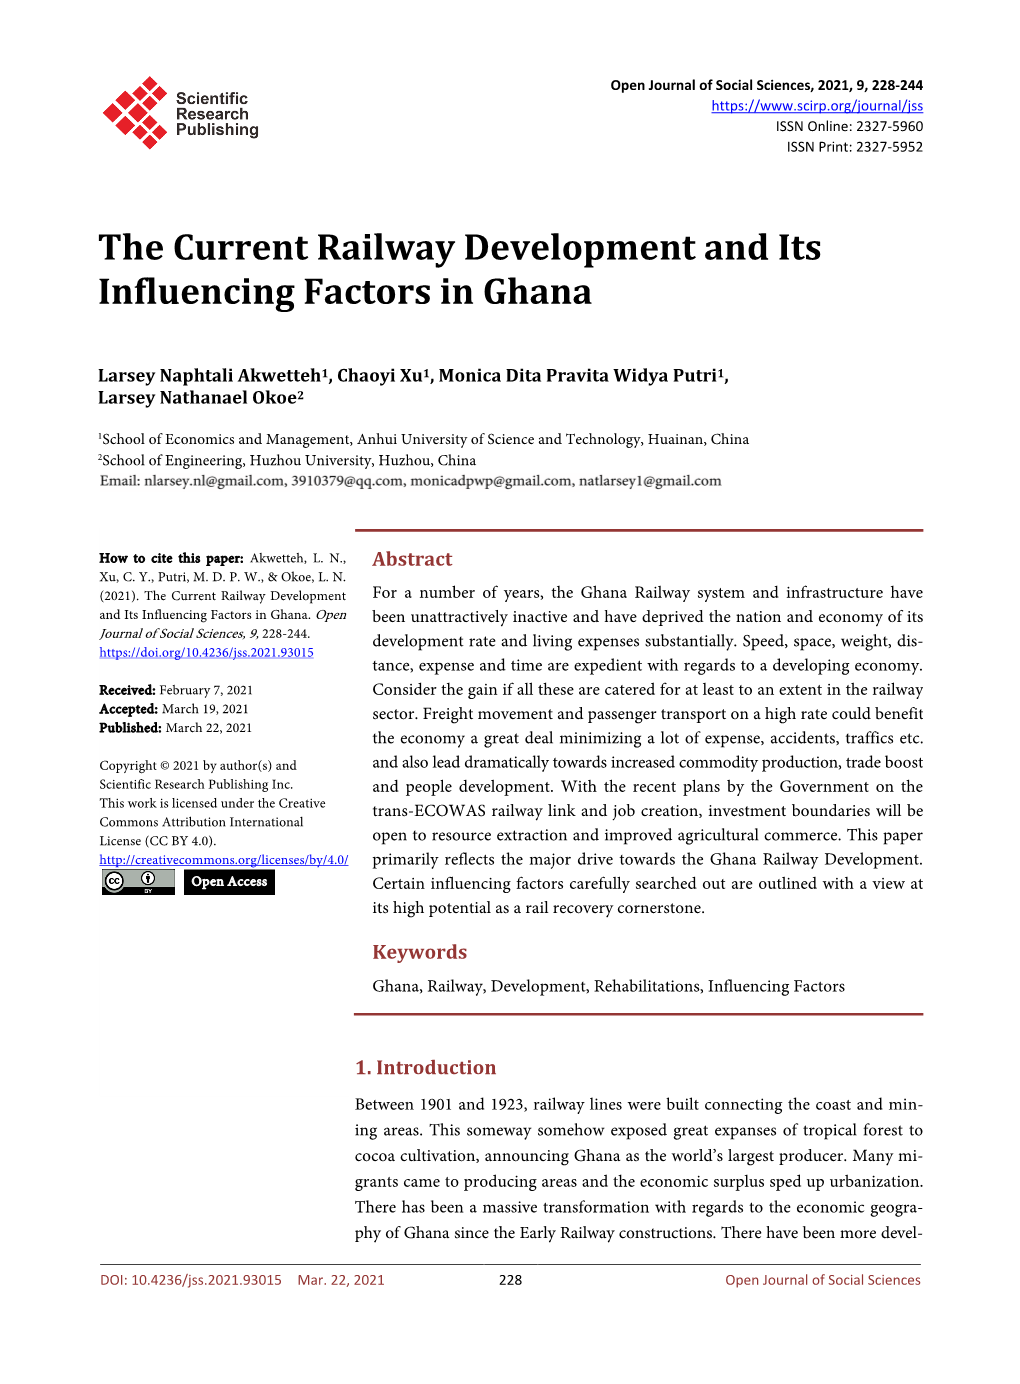 The Current Railway Development and Its Influencing Factors in Ghana